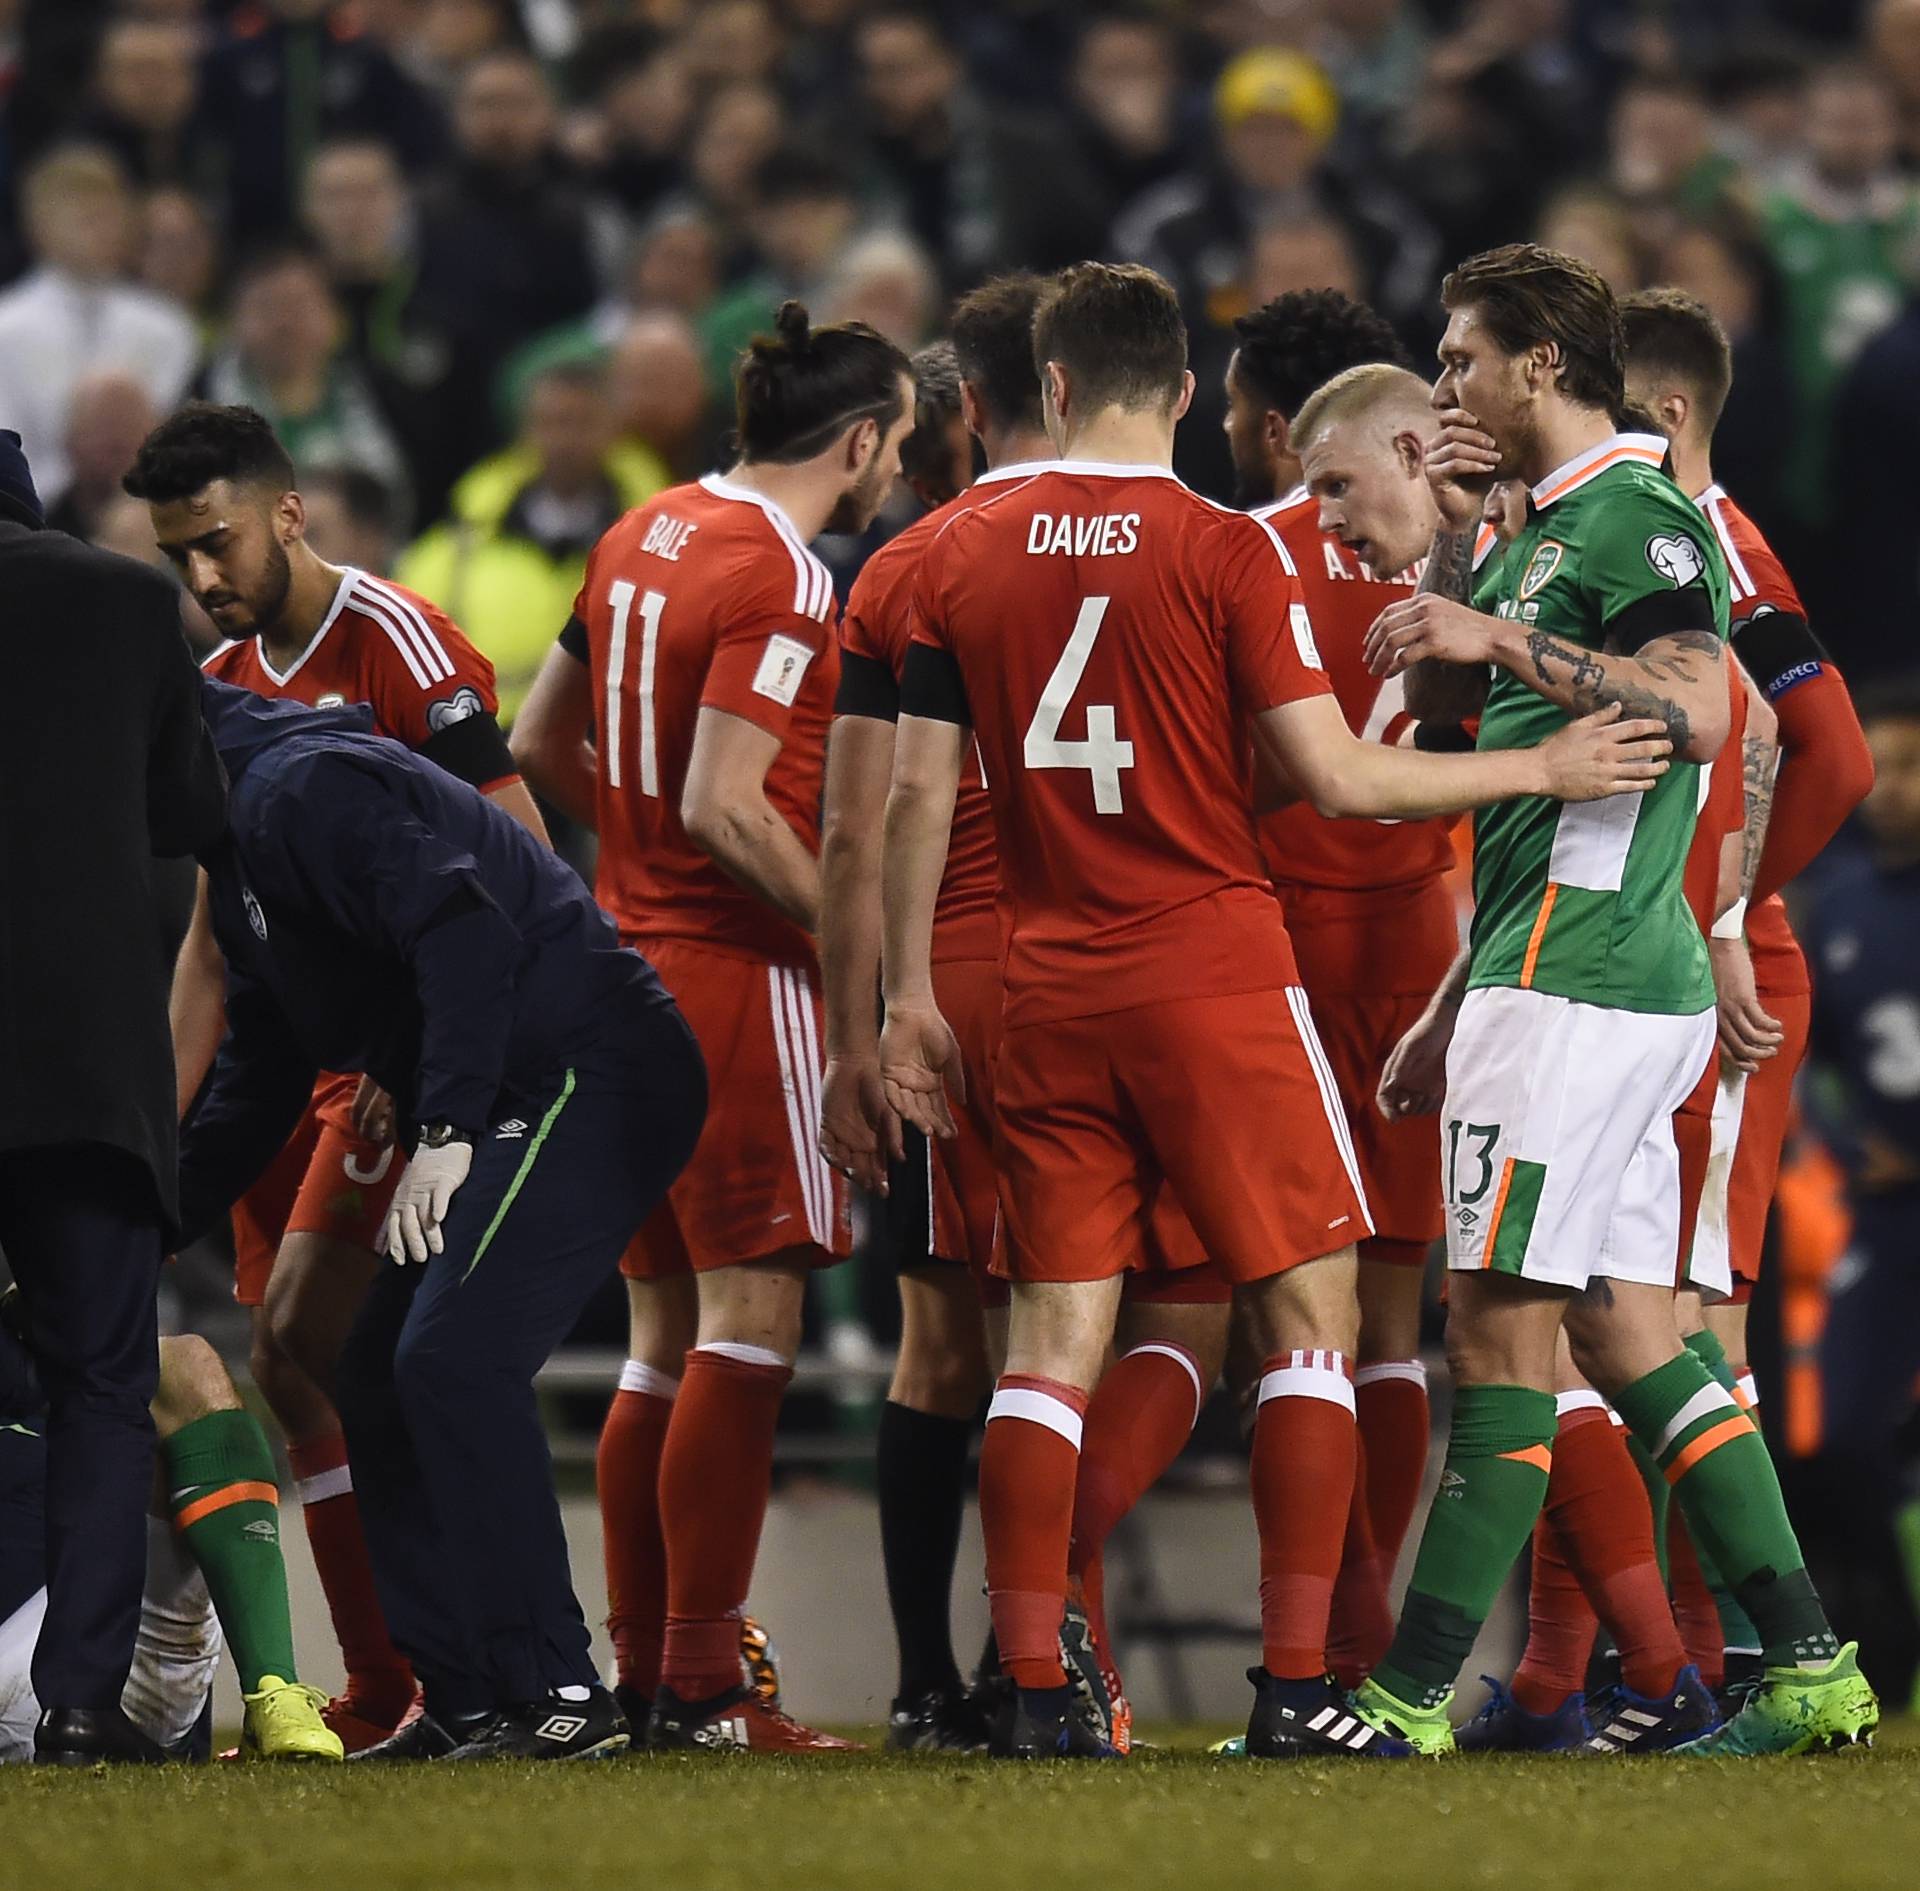 Republic of Ireland's Seamus Coleman receives medical attention